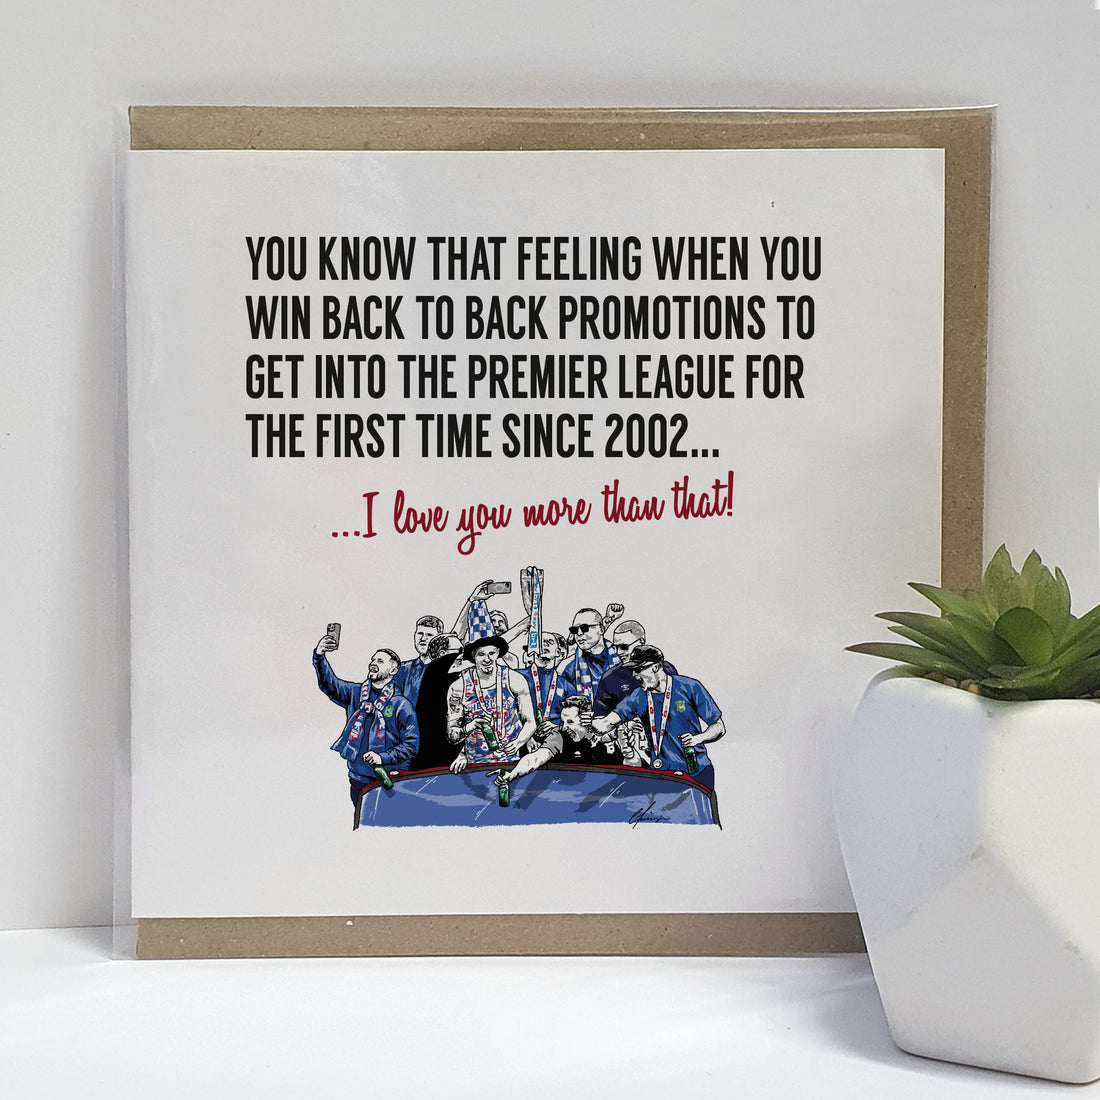 Ipswich Town football team on an open-top bus celebrating their Premier League promotion, with romantic text comparing the joy of their victory to love, designed by Local Lingo.